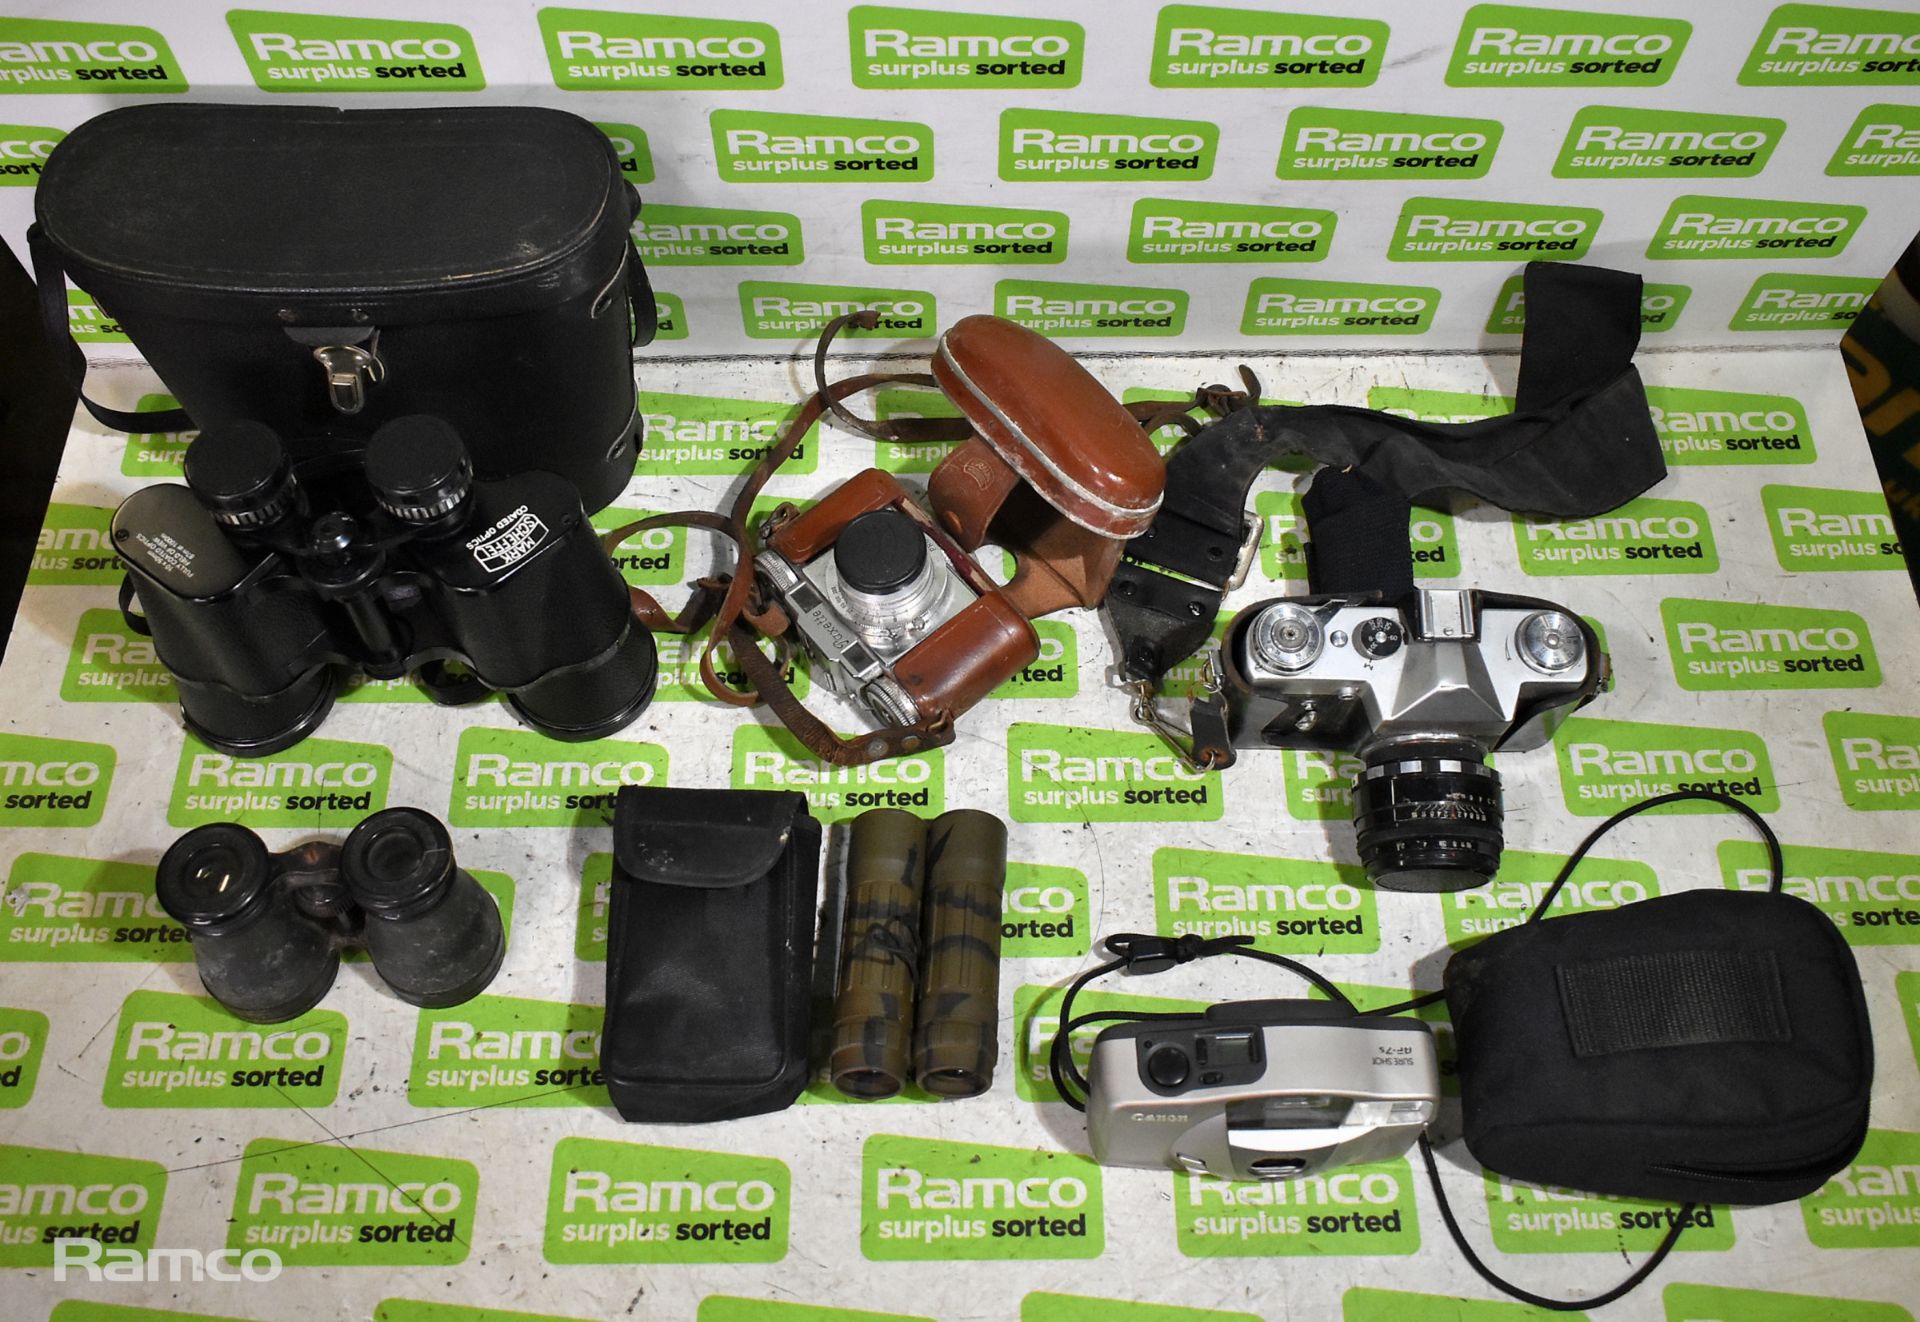 3x Pairs of binoculars and 3x cameras with and without cases - Bild 2 aus 23